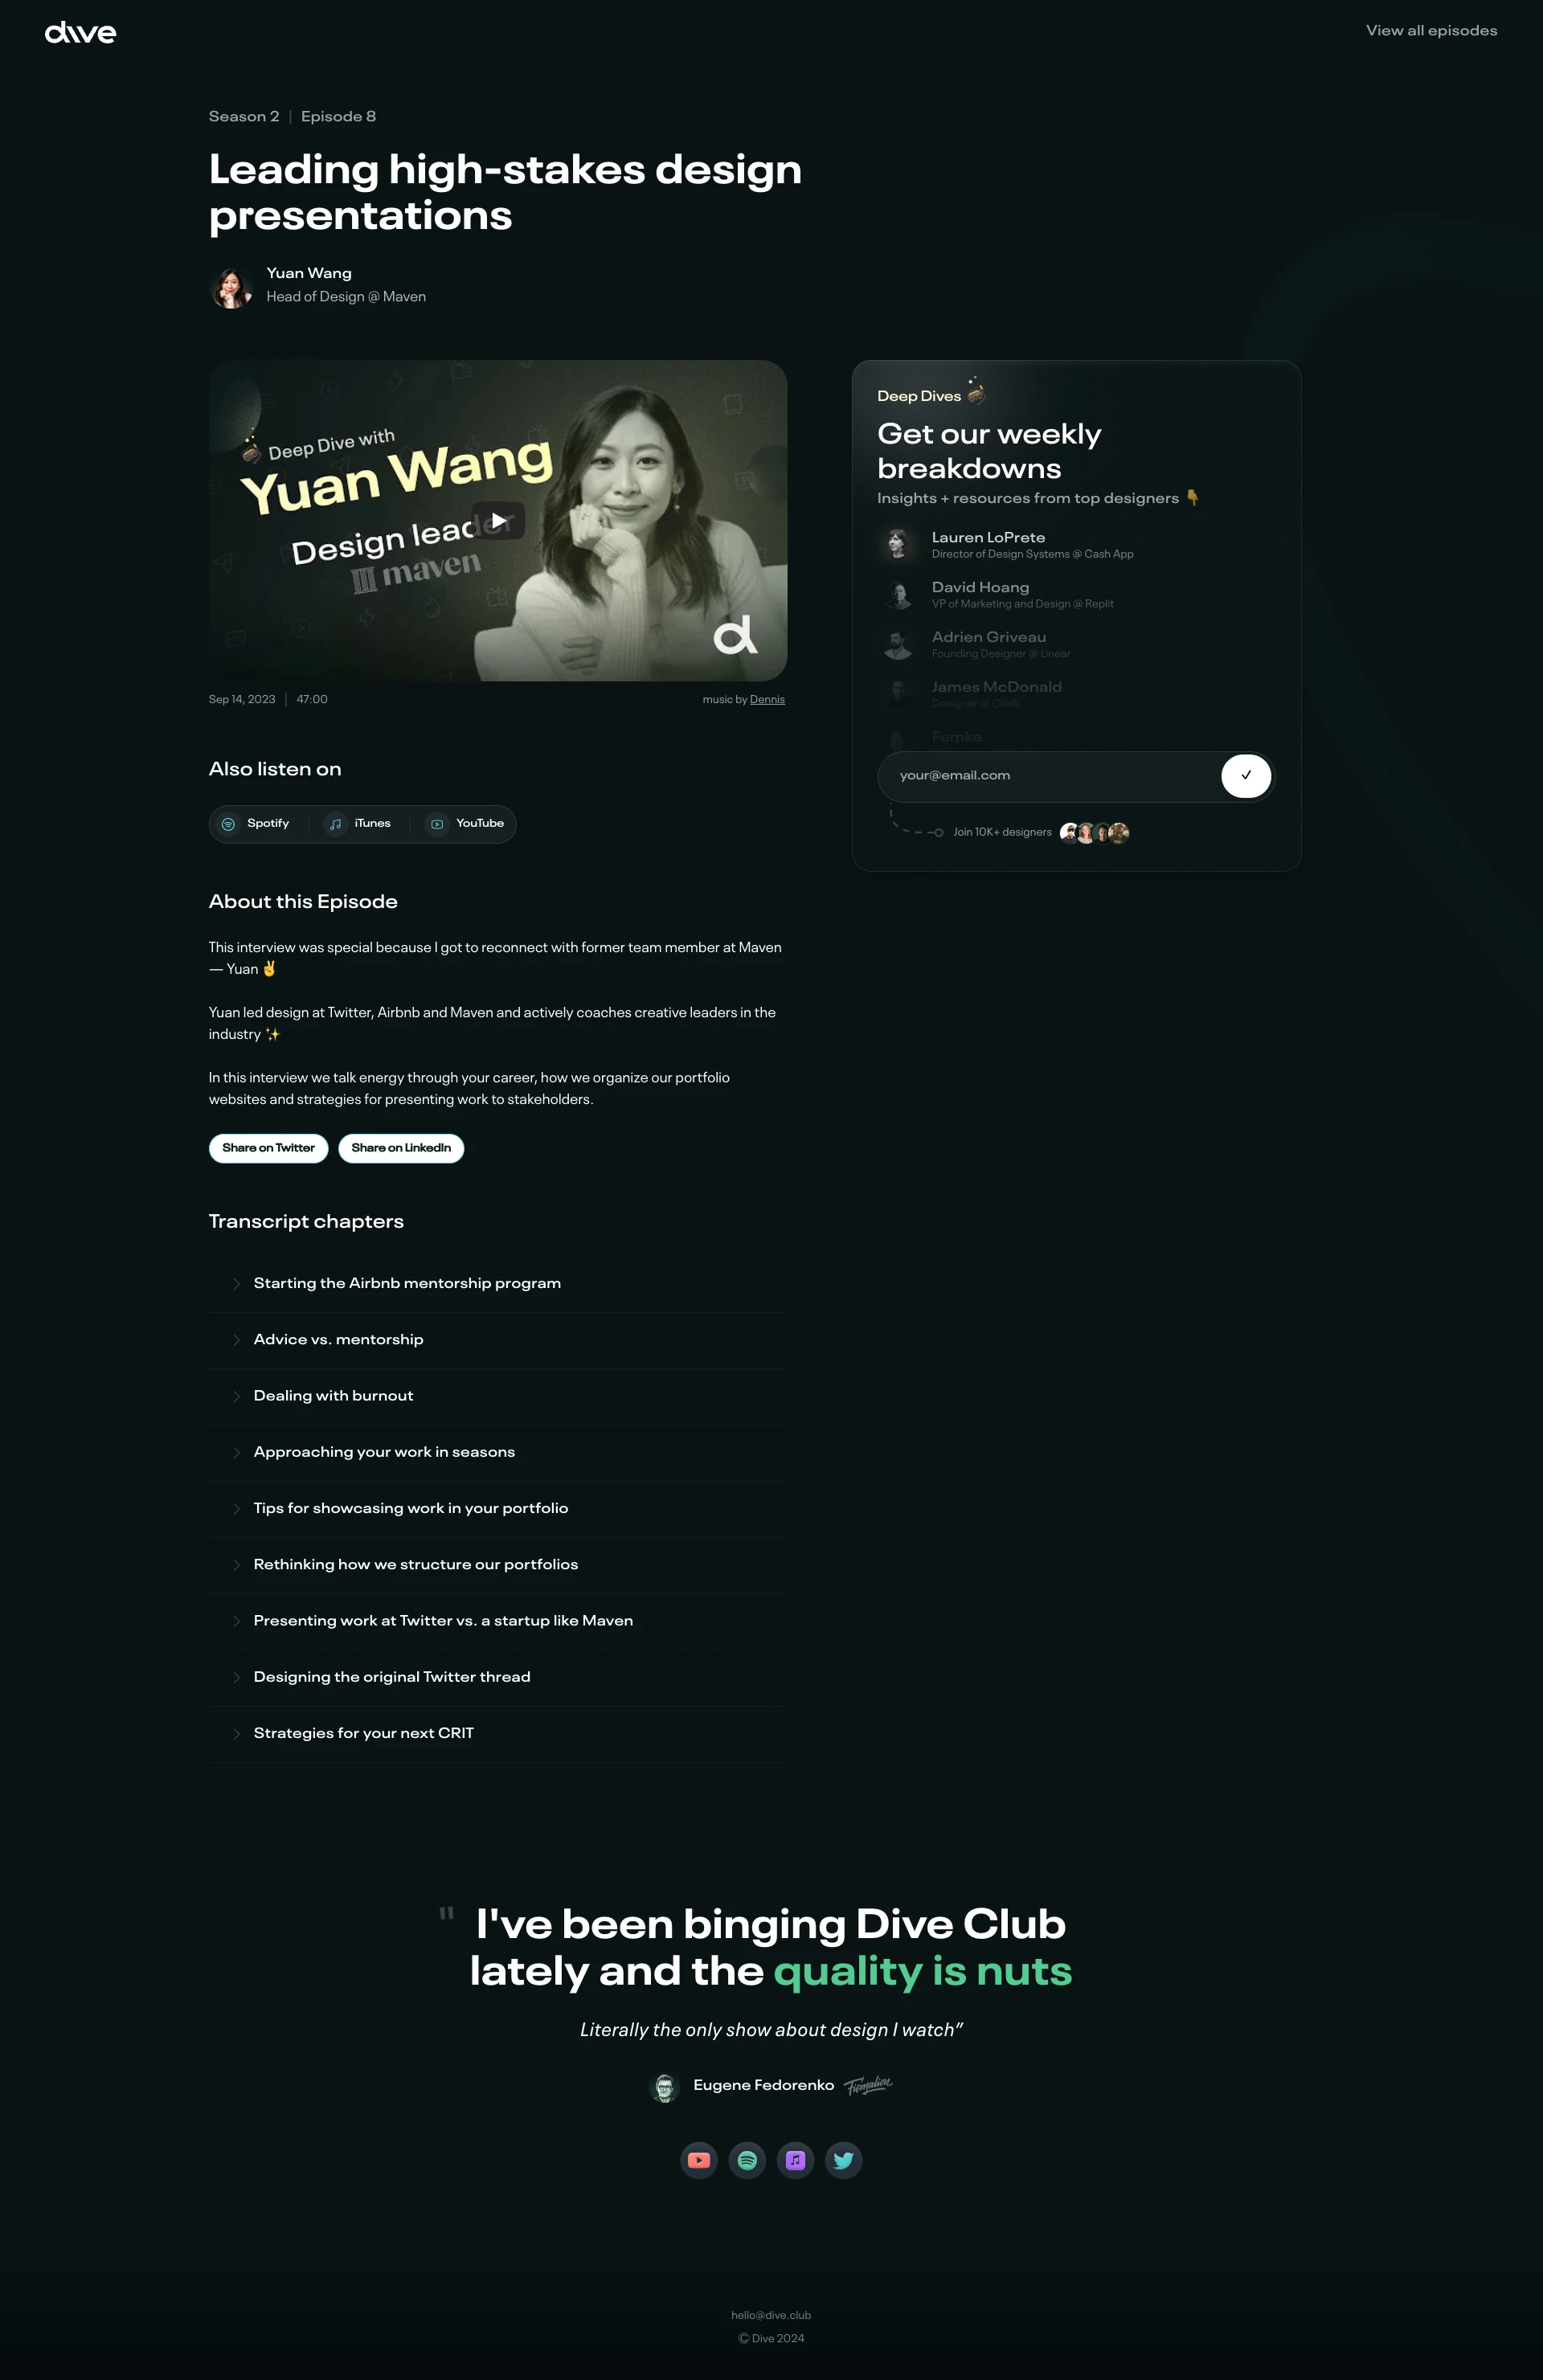 Dive Landing Page Example: Dive Club is a podcast and email series that unlocks knowledge from designers and leaders at today's top teams